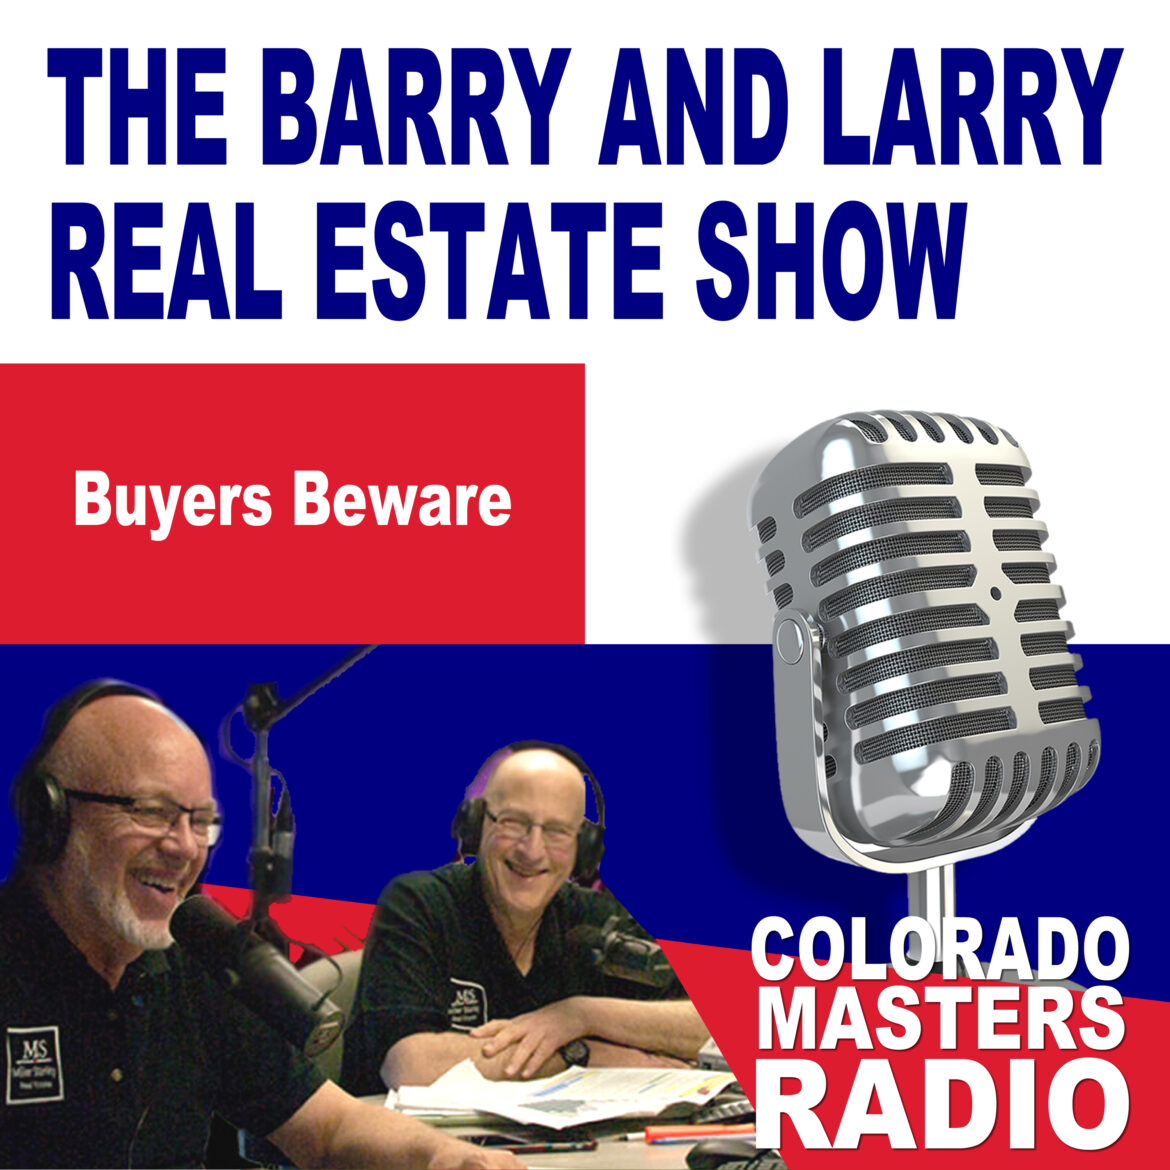 The Larry and Barry Real Estate Show - Buyers Beware